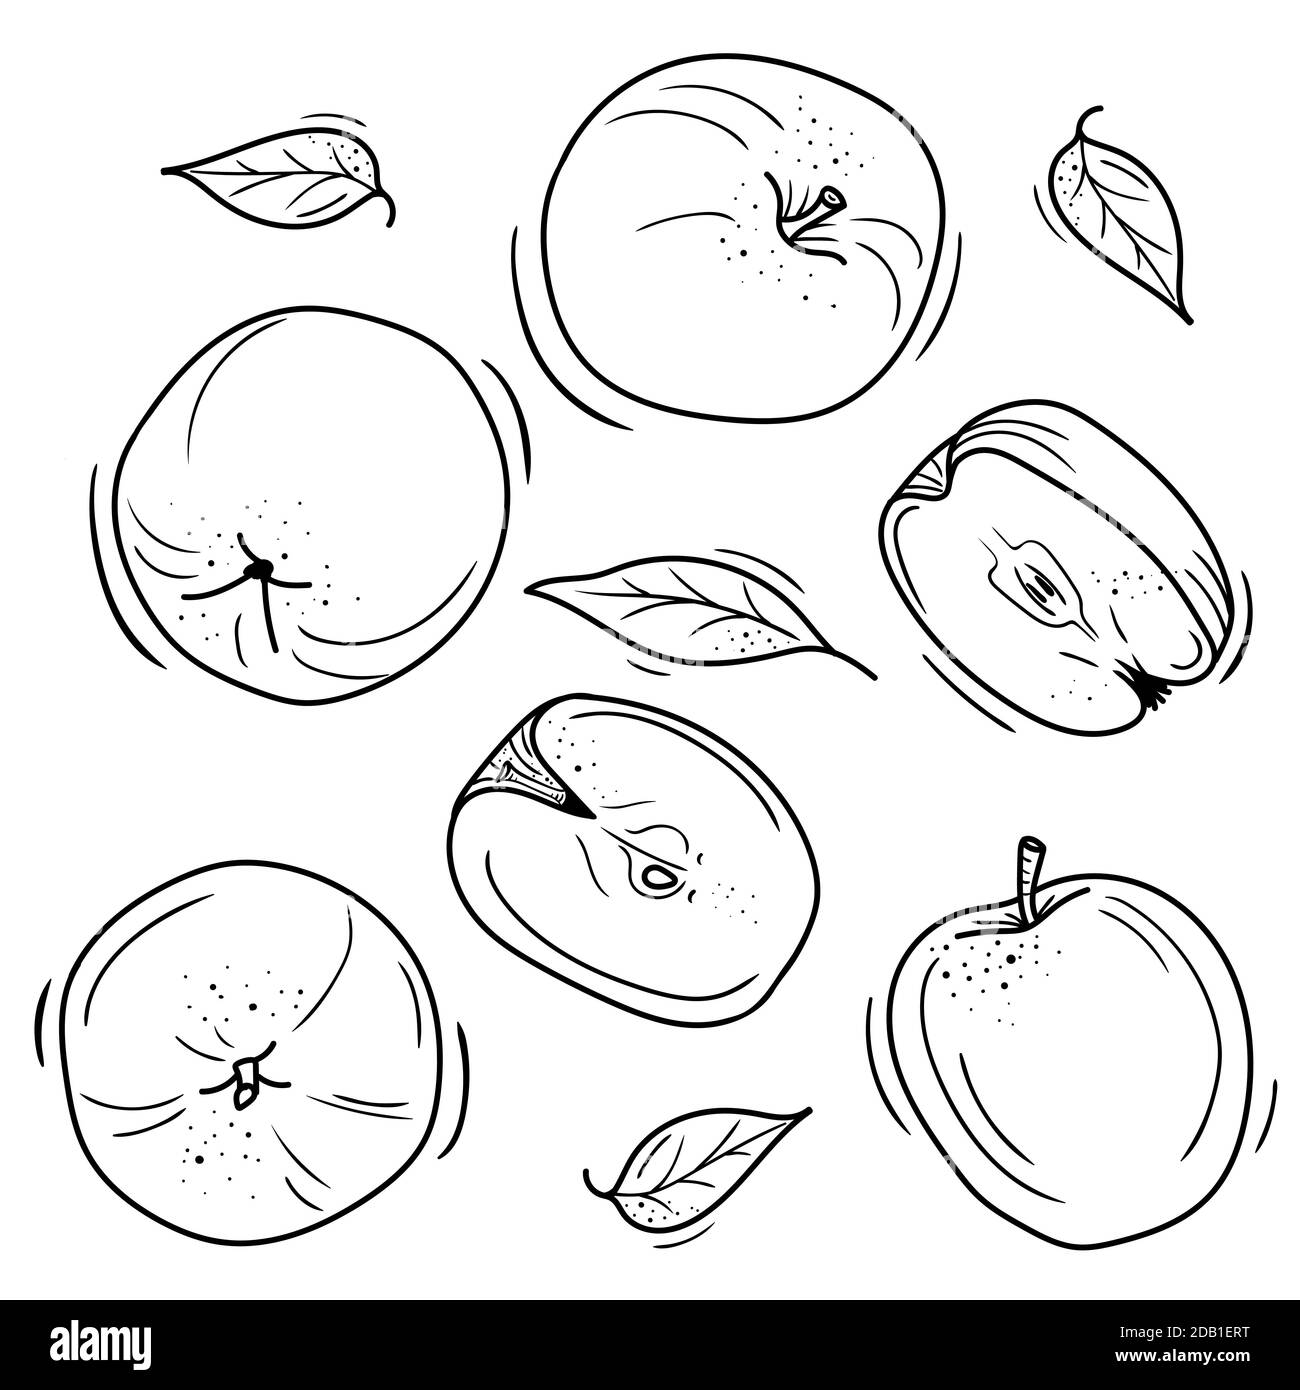 vector illustration of apples in Doodle style. Stock Vector